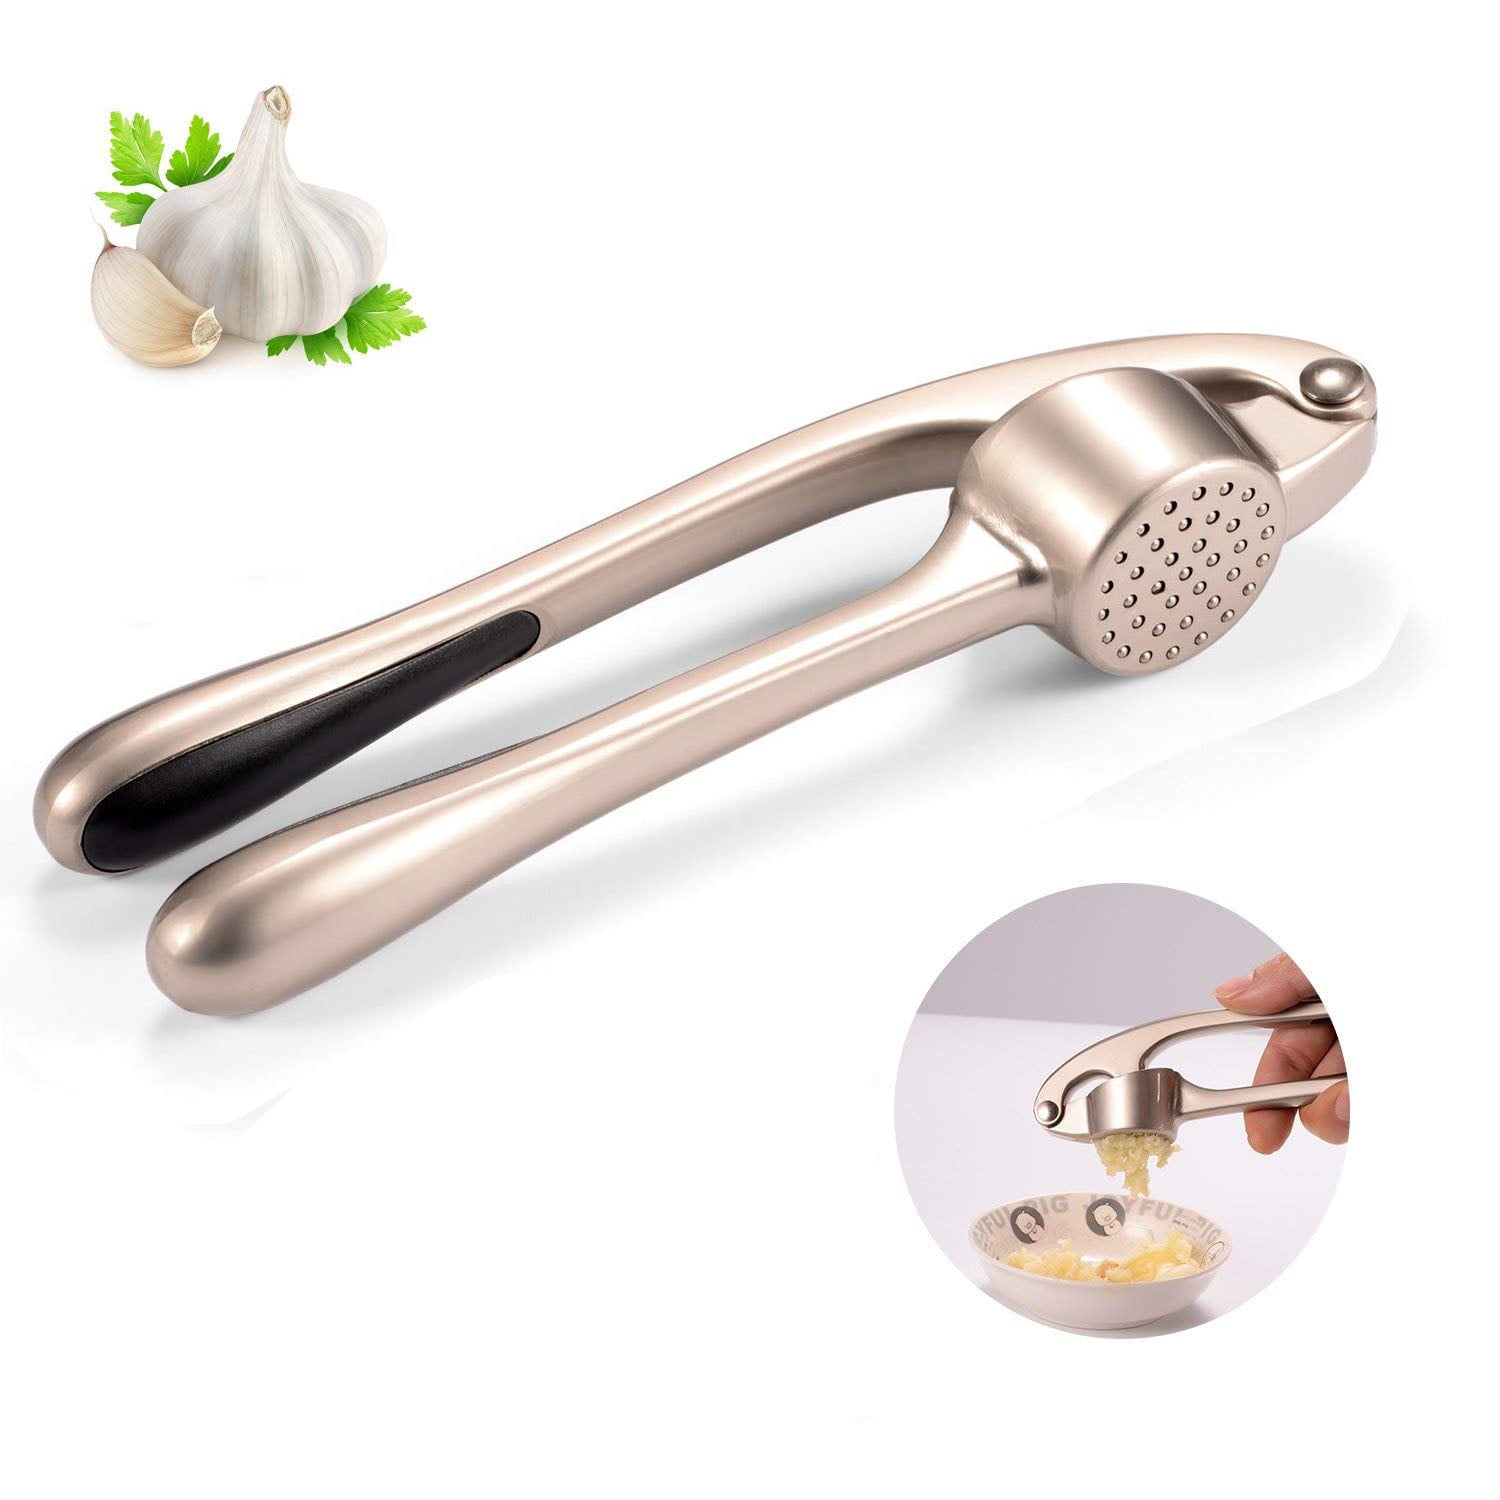 Stainless Steel Handheld Garlic Mincer Rolling Crusher Ginger Press Squeezer and Silicone Tube Garlic Peeler with Clean Brush 3 Pieces JTENGYAO Garlic Press Rocker Set